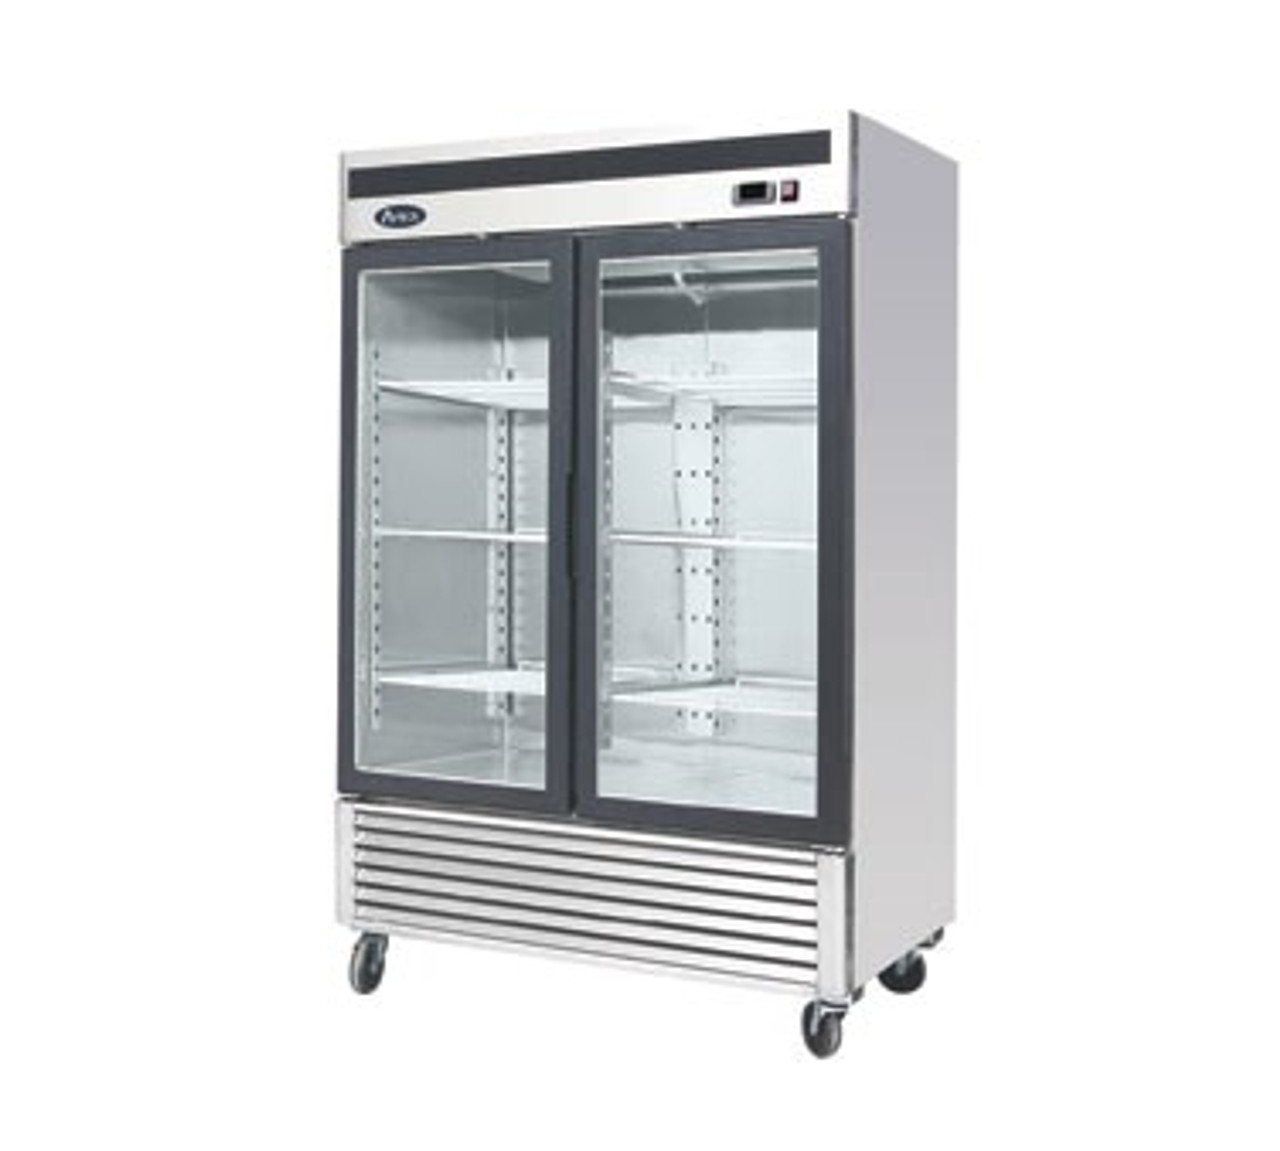 Freezer Merchandiser, two-section, 54-2/5"W x 31-7/10"D x 83-1/10"H, bottom-mount self-contained refrigeration, 44.8 cu. ft., (2) self-closing hinged glass doors with locks, digital temperature control, -8° to 0°F temperature range, (8) adjustable shelves, LED interior lighting, automatic evaporation, electric defrost, stainless steel interior & exterior, galvanized steel back, 4" casters, R290 Hydrocarbon refrigerant, 3/4 HP, 115v/60/1-ph, 8.6 amps, cord, NEMA 5-15P, cETLus, ETL-Sanitation, ENERGY STAR®